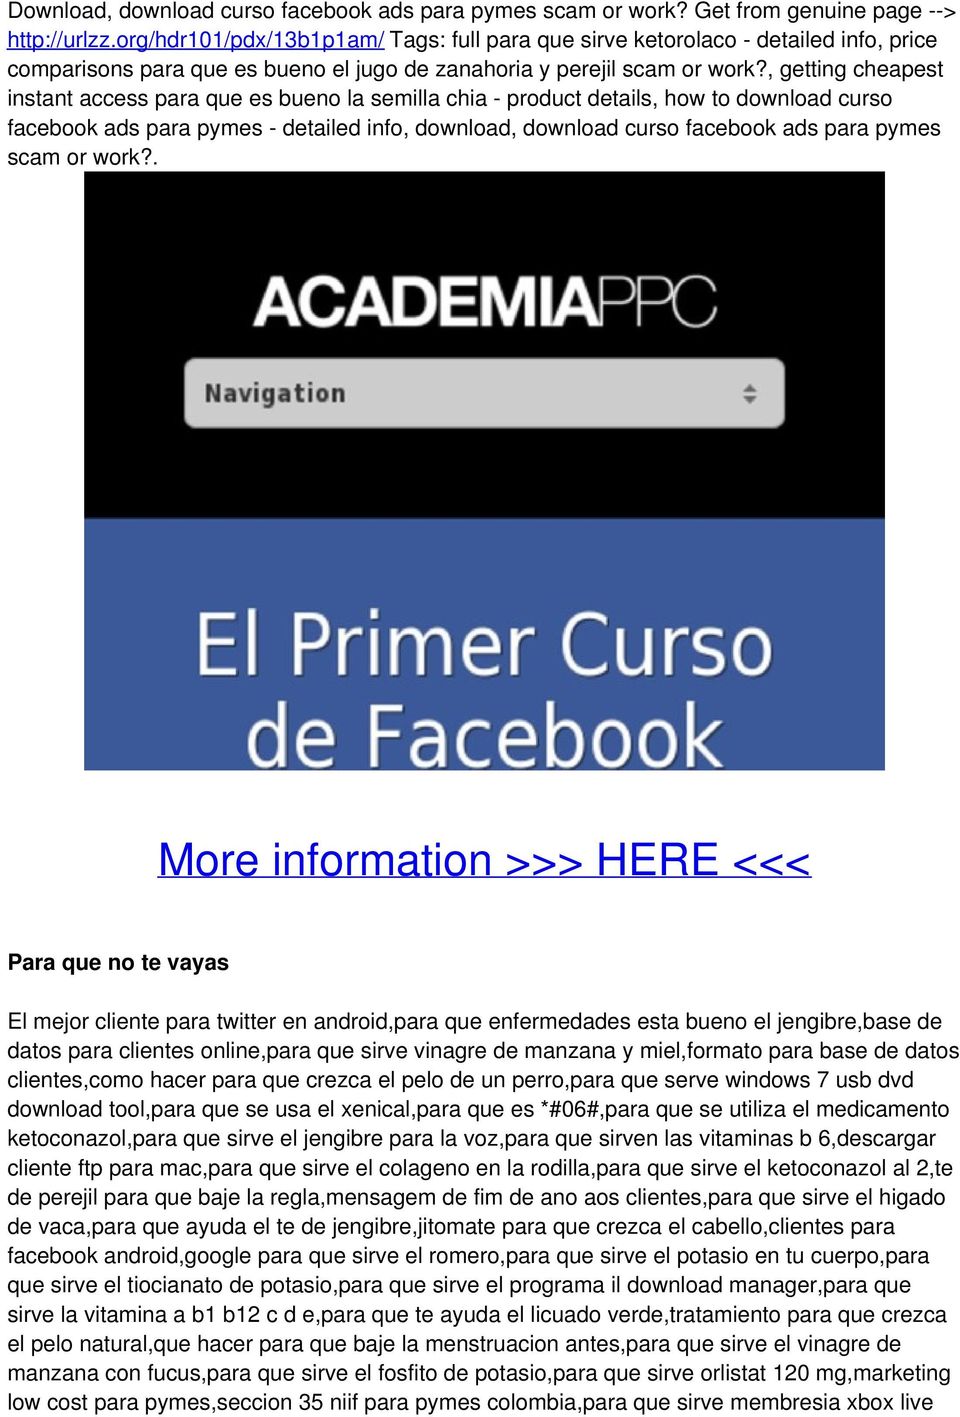 , getting cheapest instant access para que es bueno la semilla chia - product details, how to download curso facebook ads para pymes - detailed info, download, download curso facebook ads para pymes